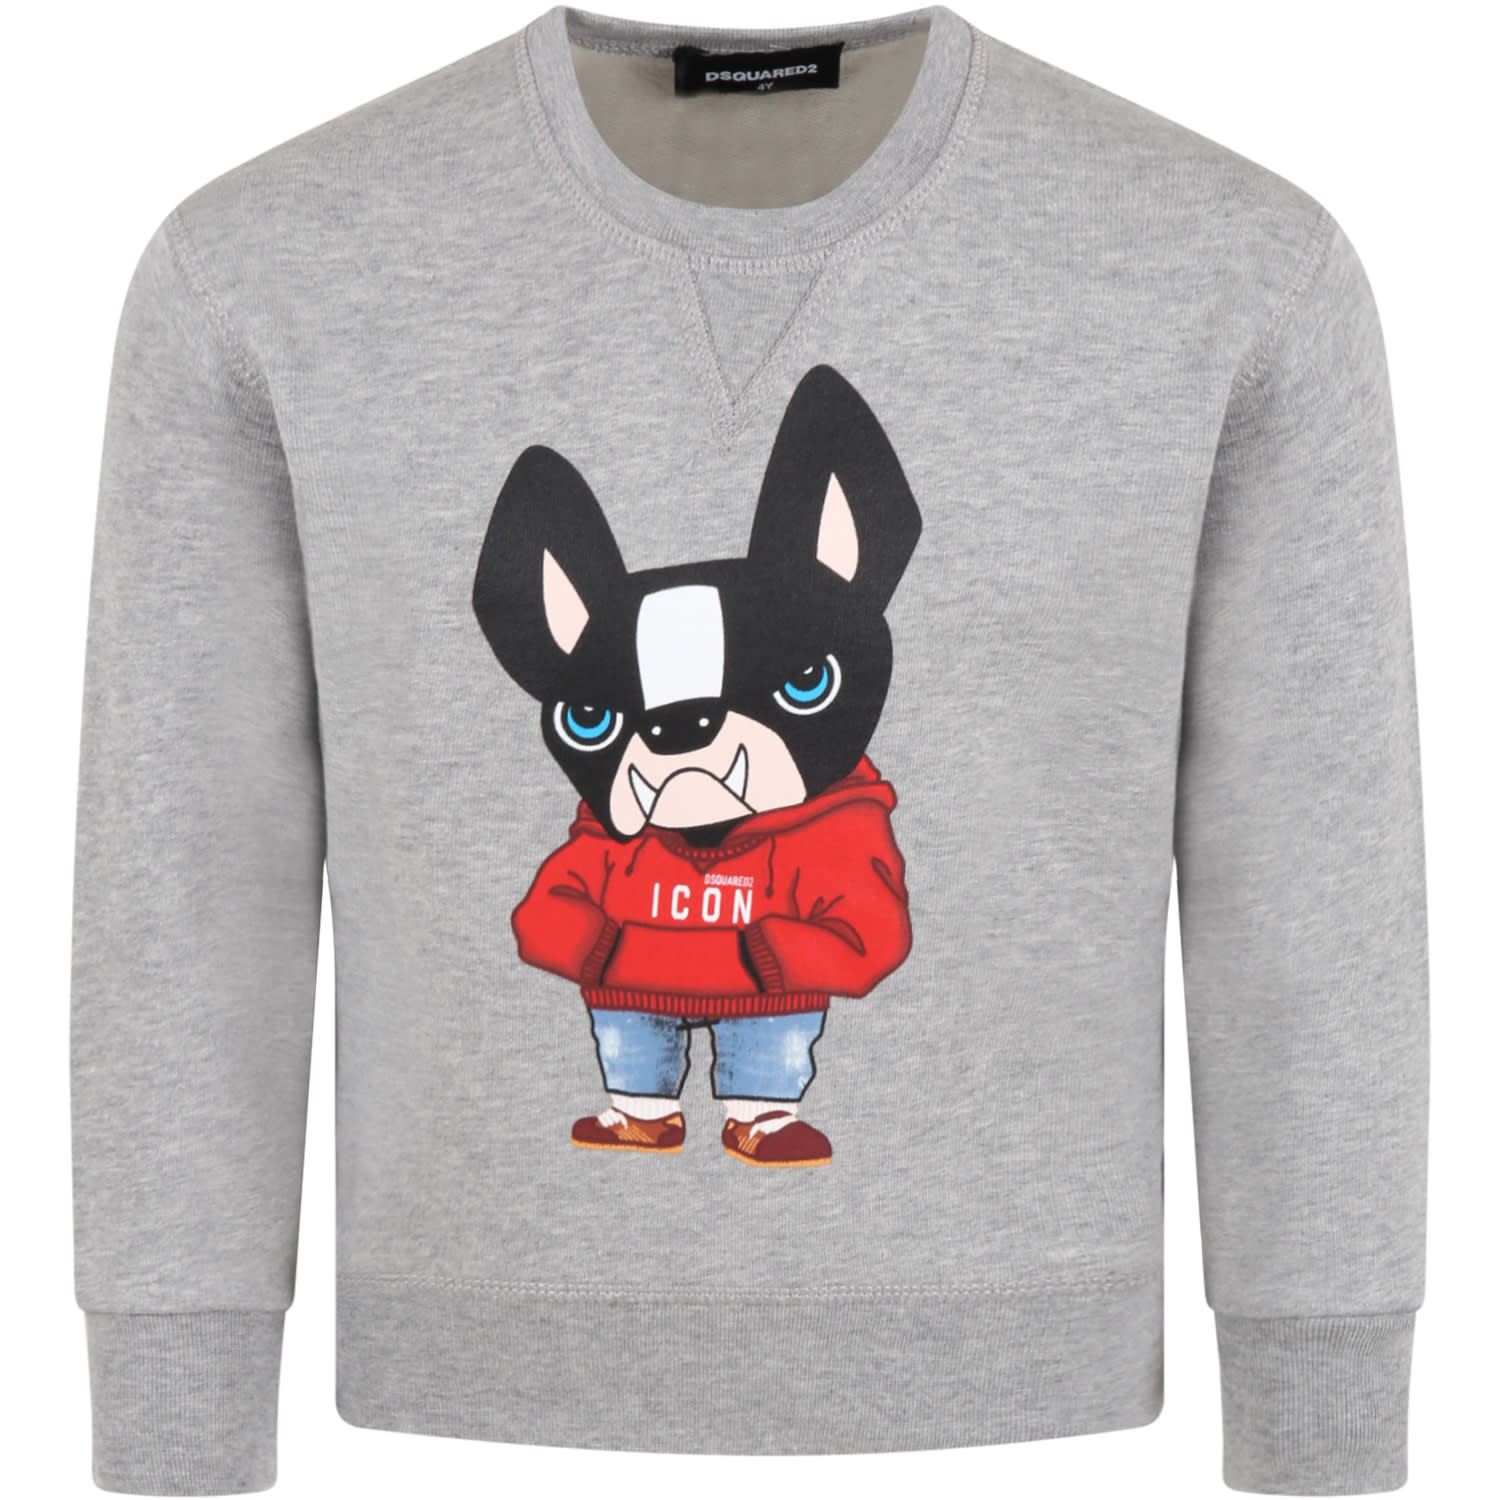 Dsquared2 Grey Sweatshirt For Boy With Iconic Dog